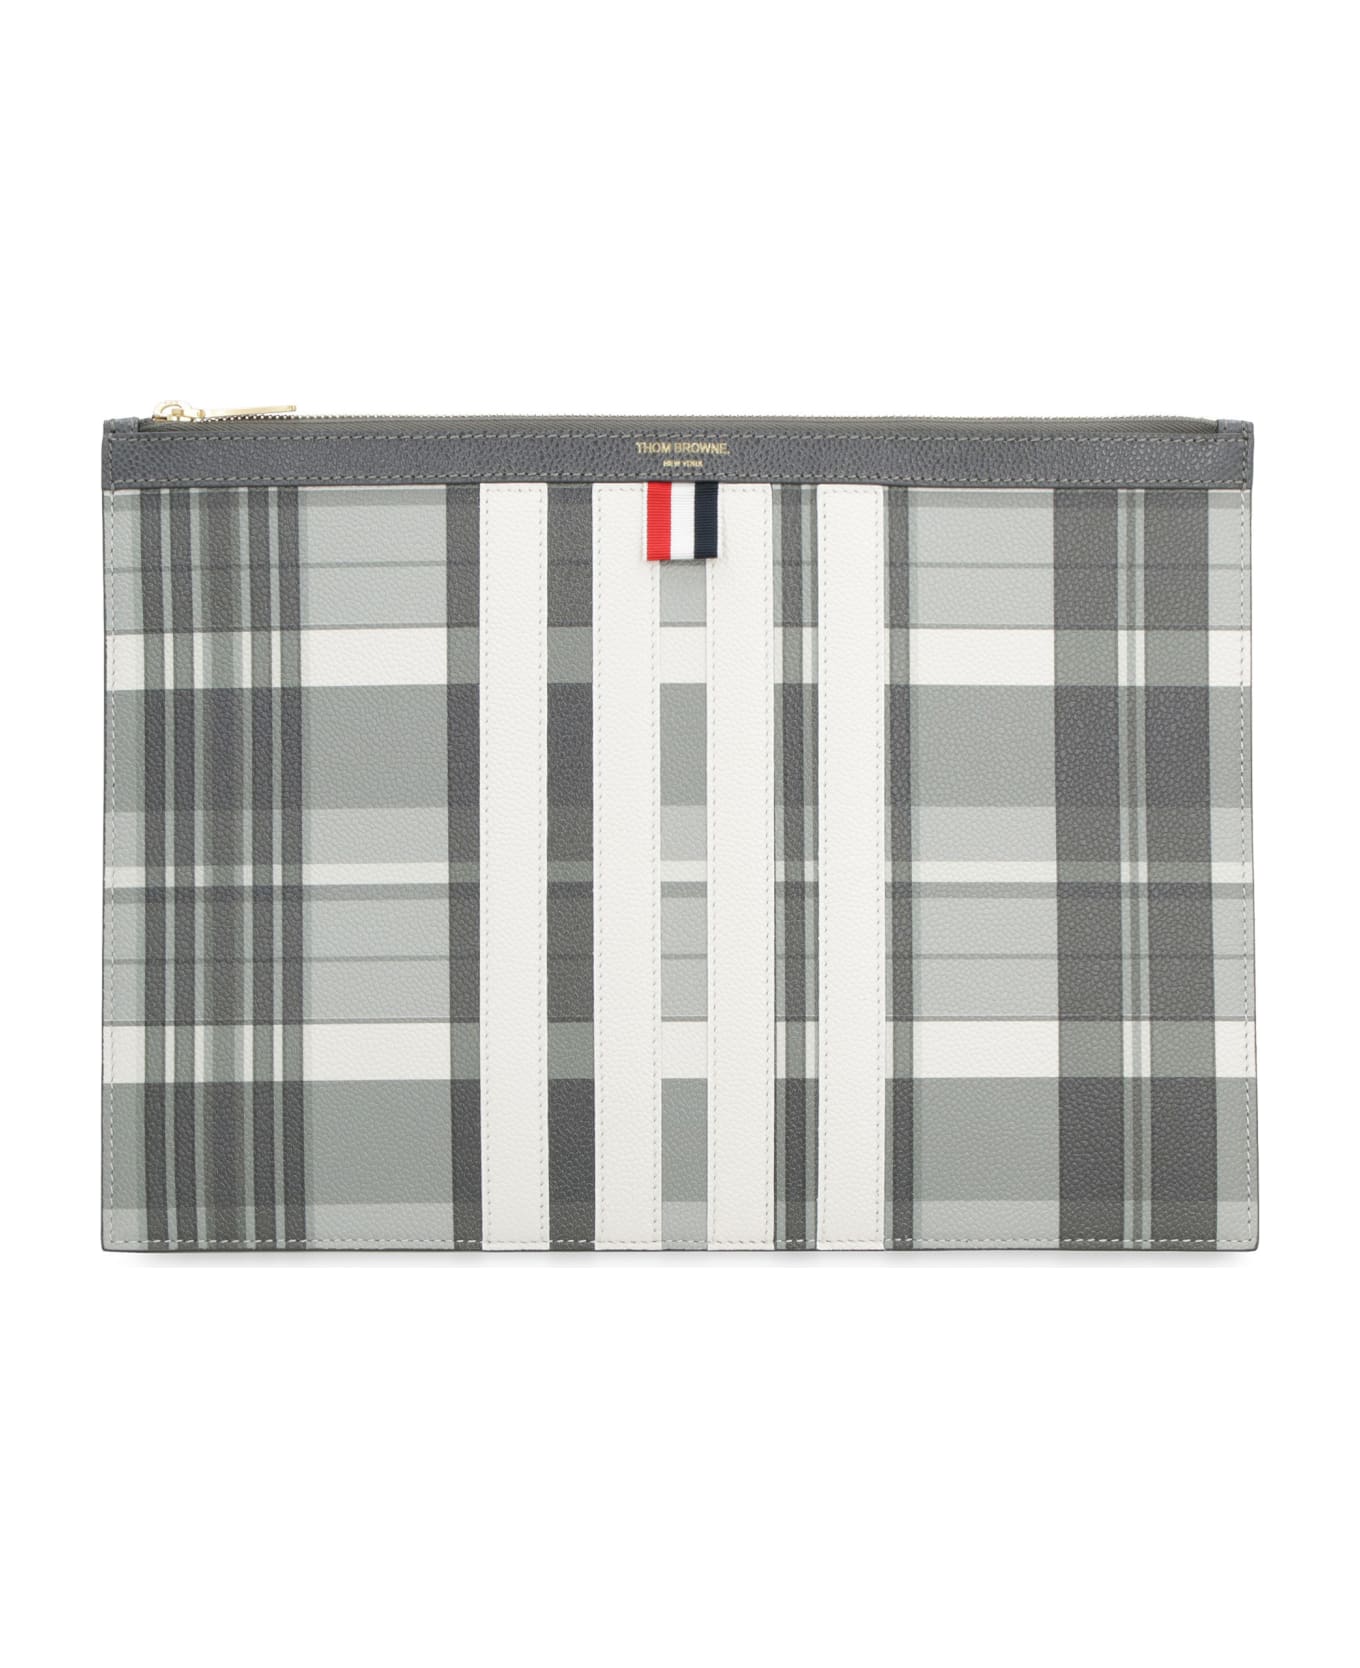 Thom Browne Grainy Leather Pouch - grey